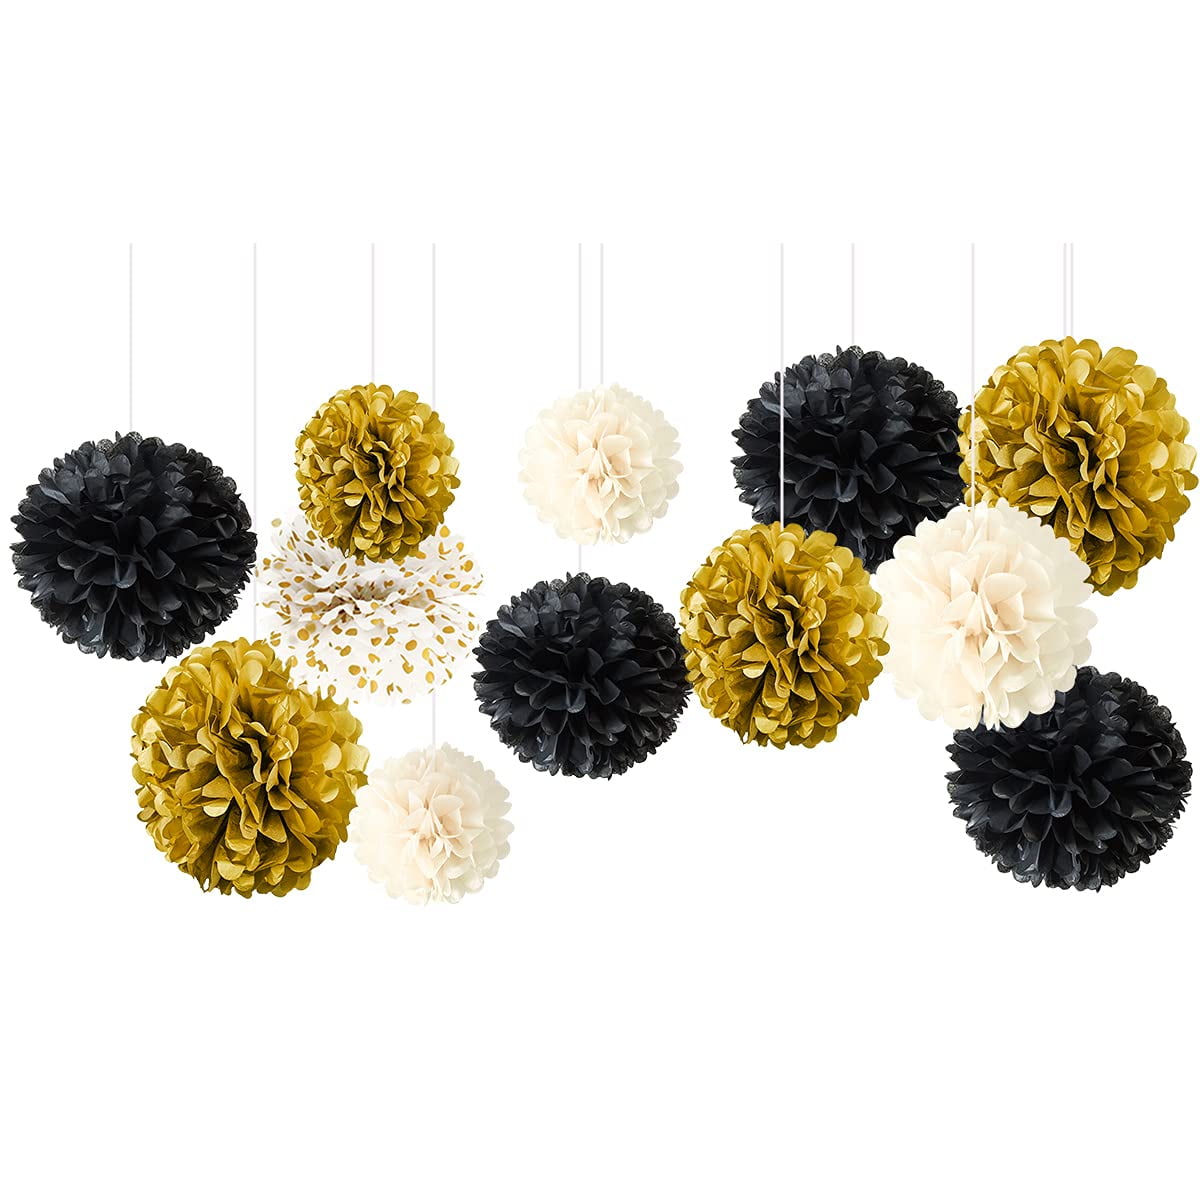 Tissue Paper Pom Poms, Cocodeko Paper Flower Ball for Birthday Party Wedding Baby Shower Bridal Shower Festival Decorations 18 Pcs - Black, Gold and